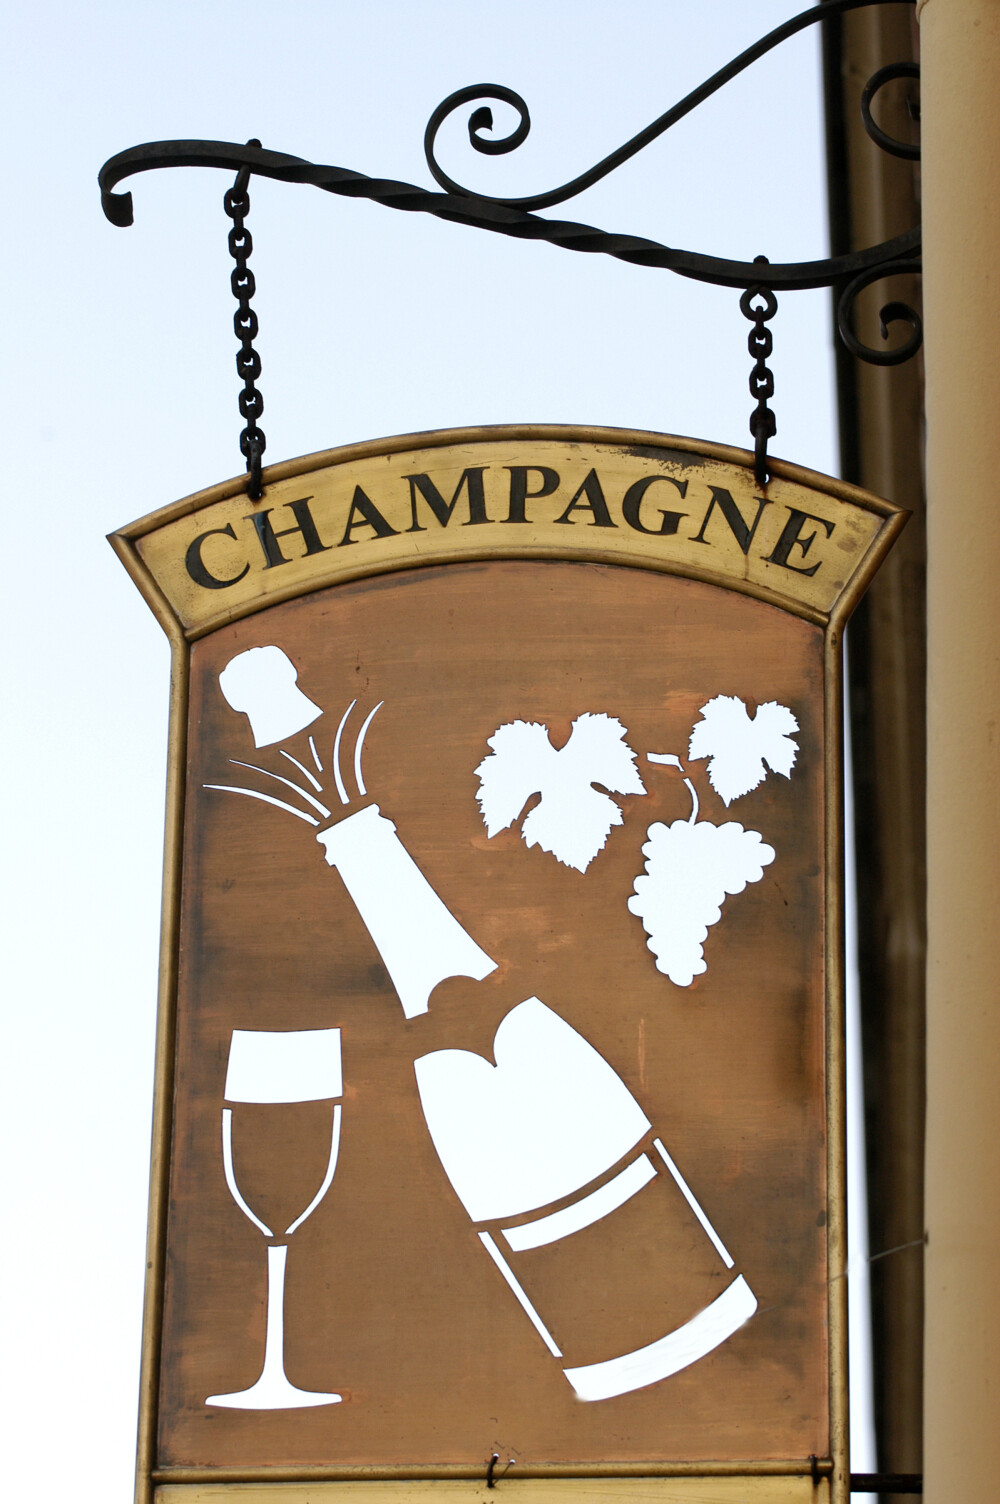 Great Restaurants to visit in Champagne